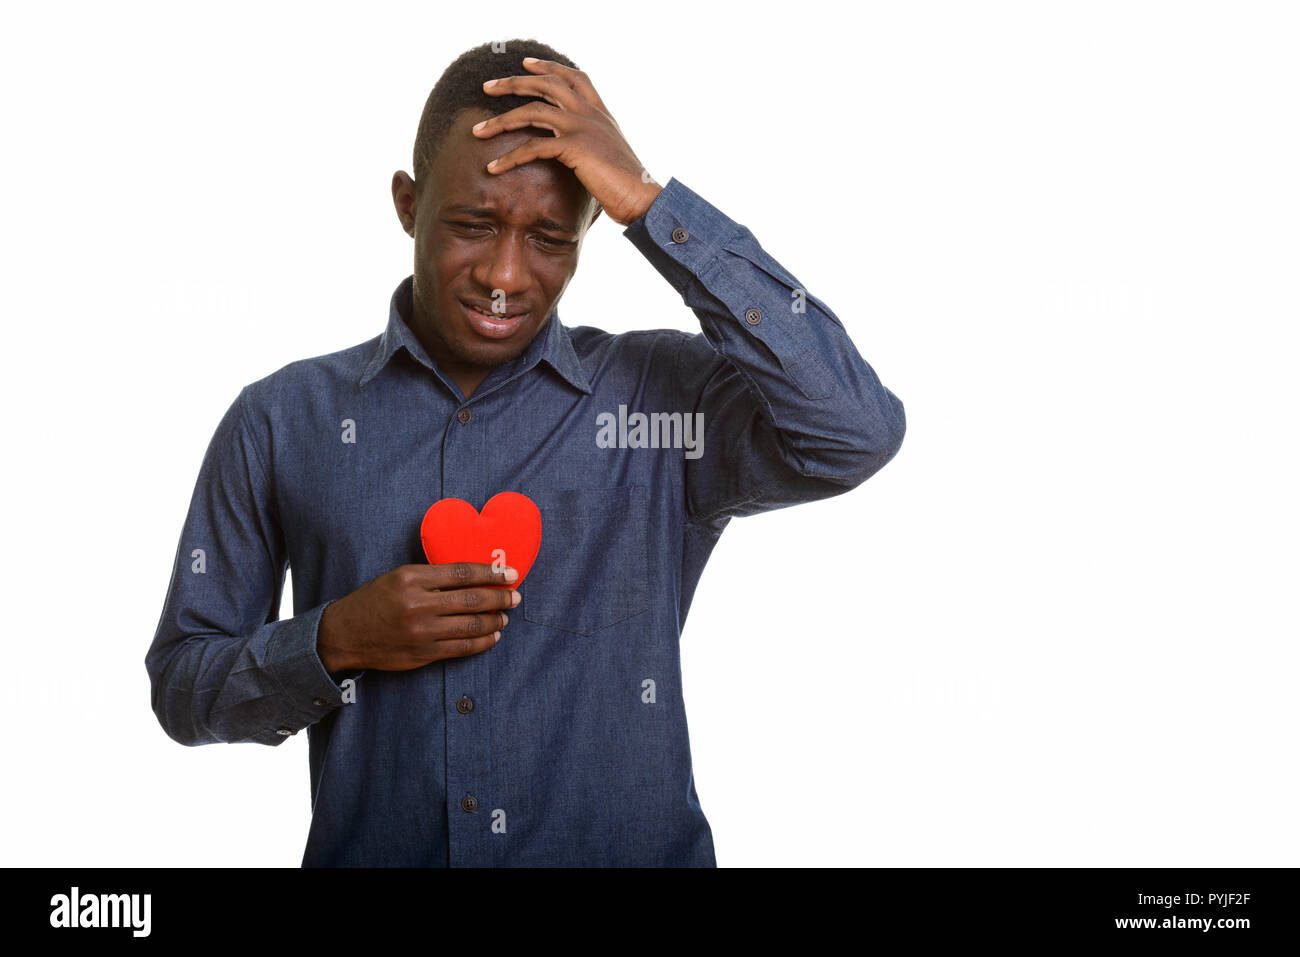 Sad African man crying while holding red heart on chest  Stock Photo